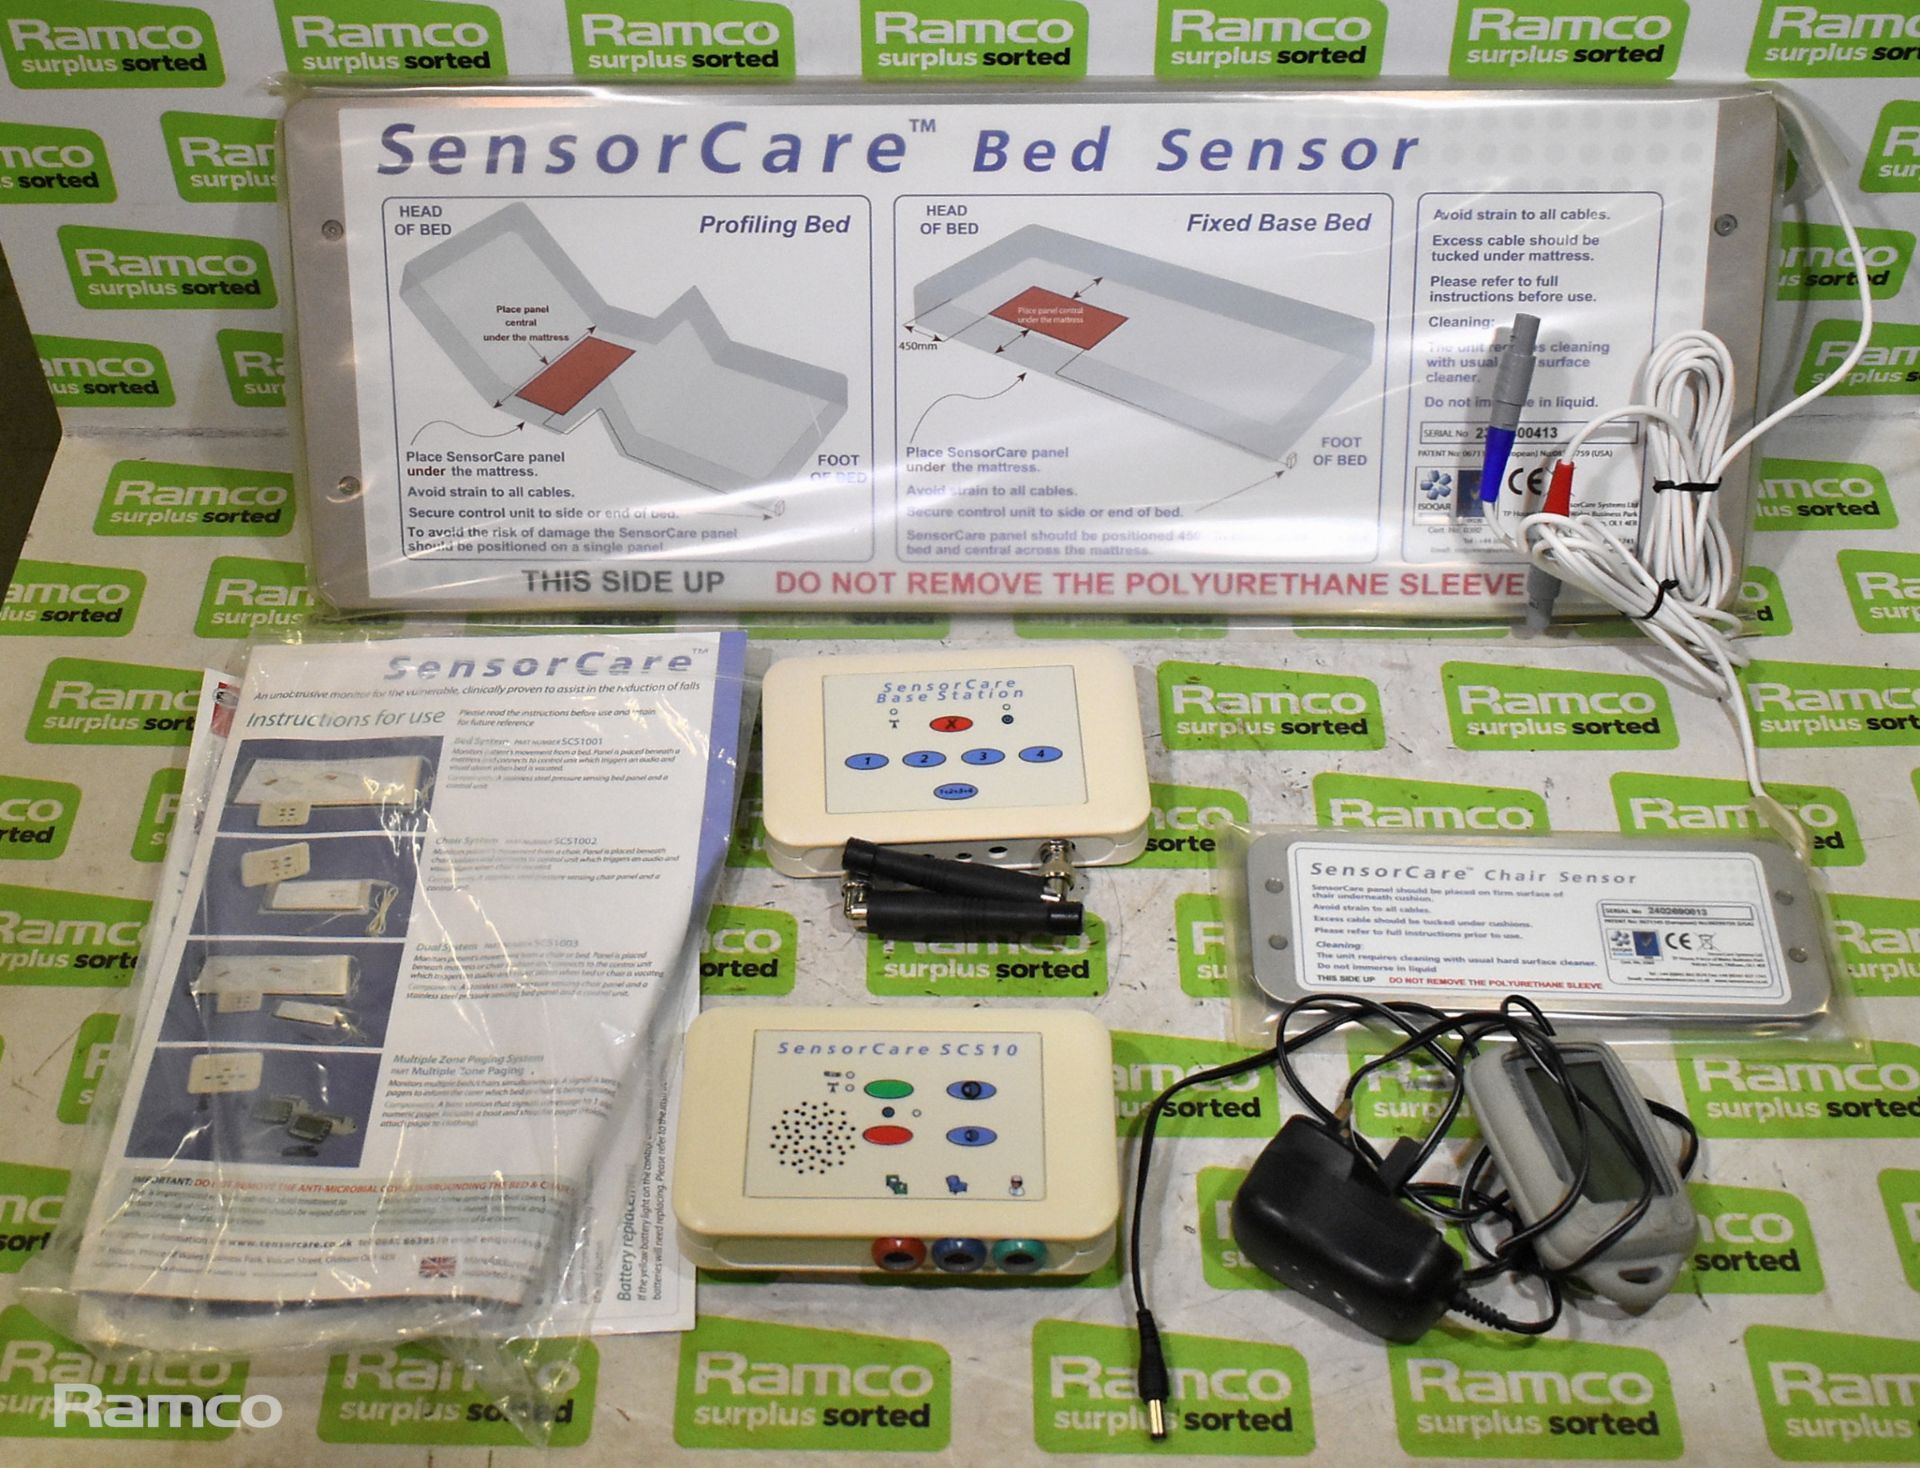 Sensorcare bed monitoring system with scope pager and transmitter - Image 2 of 8